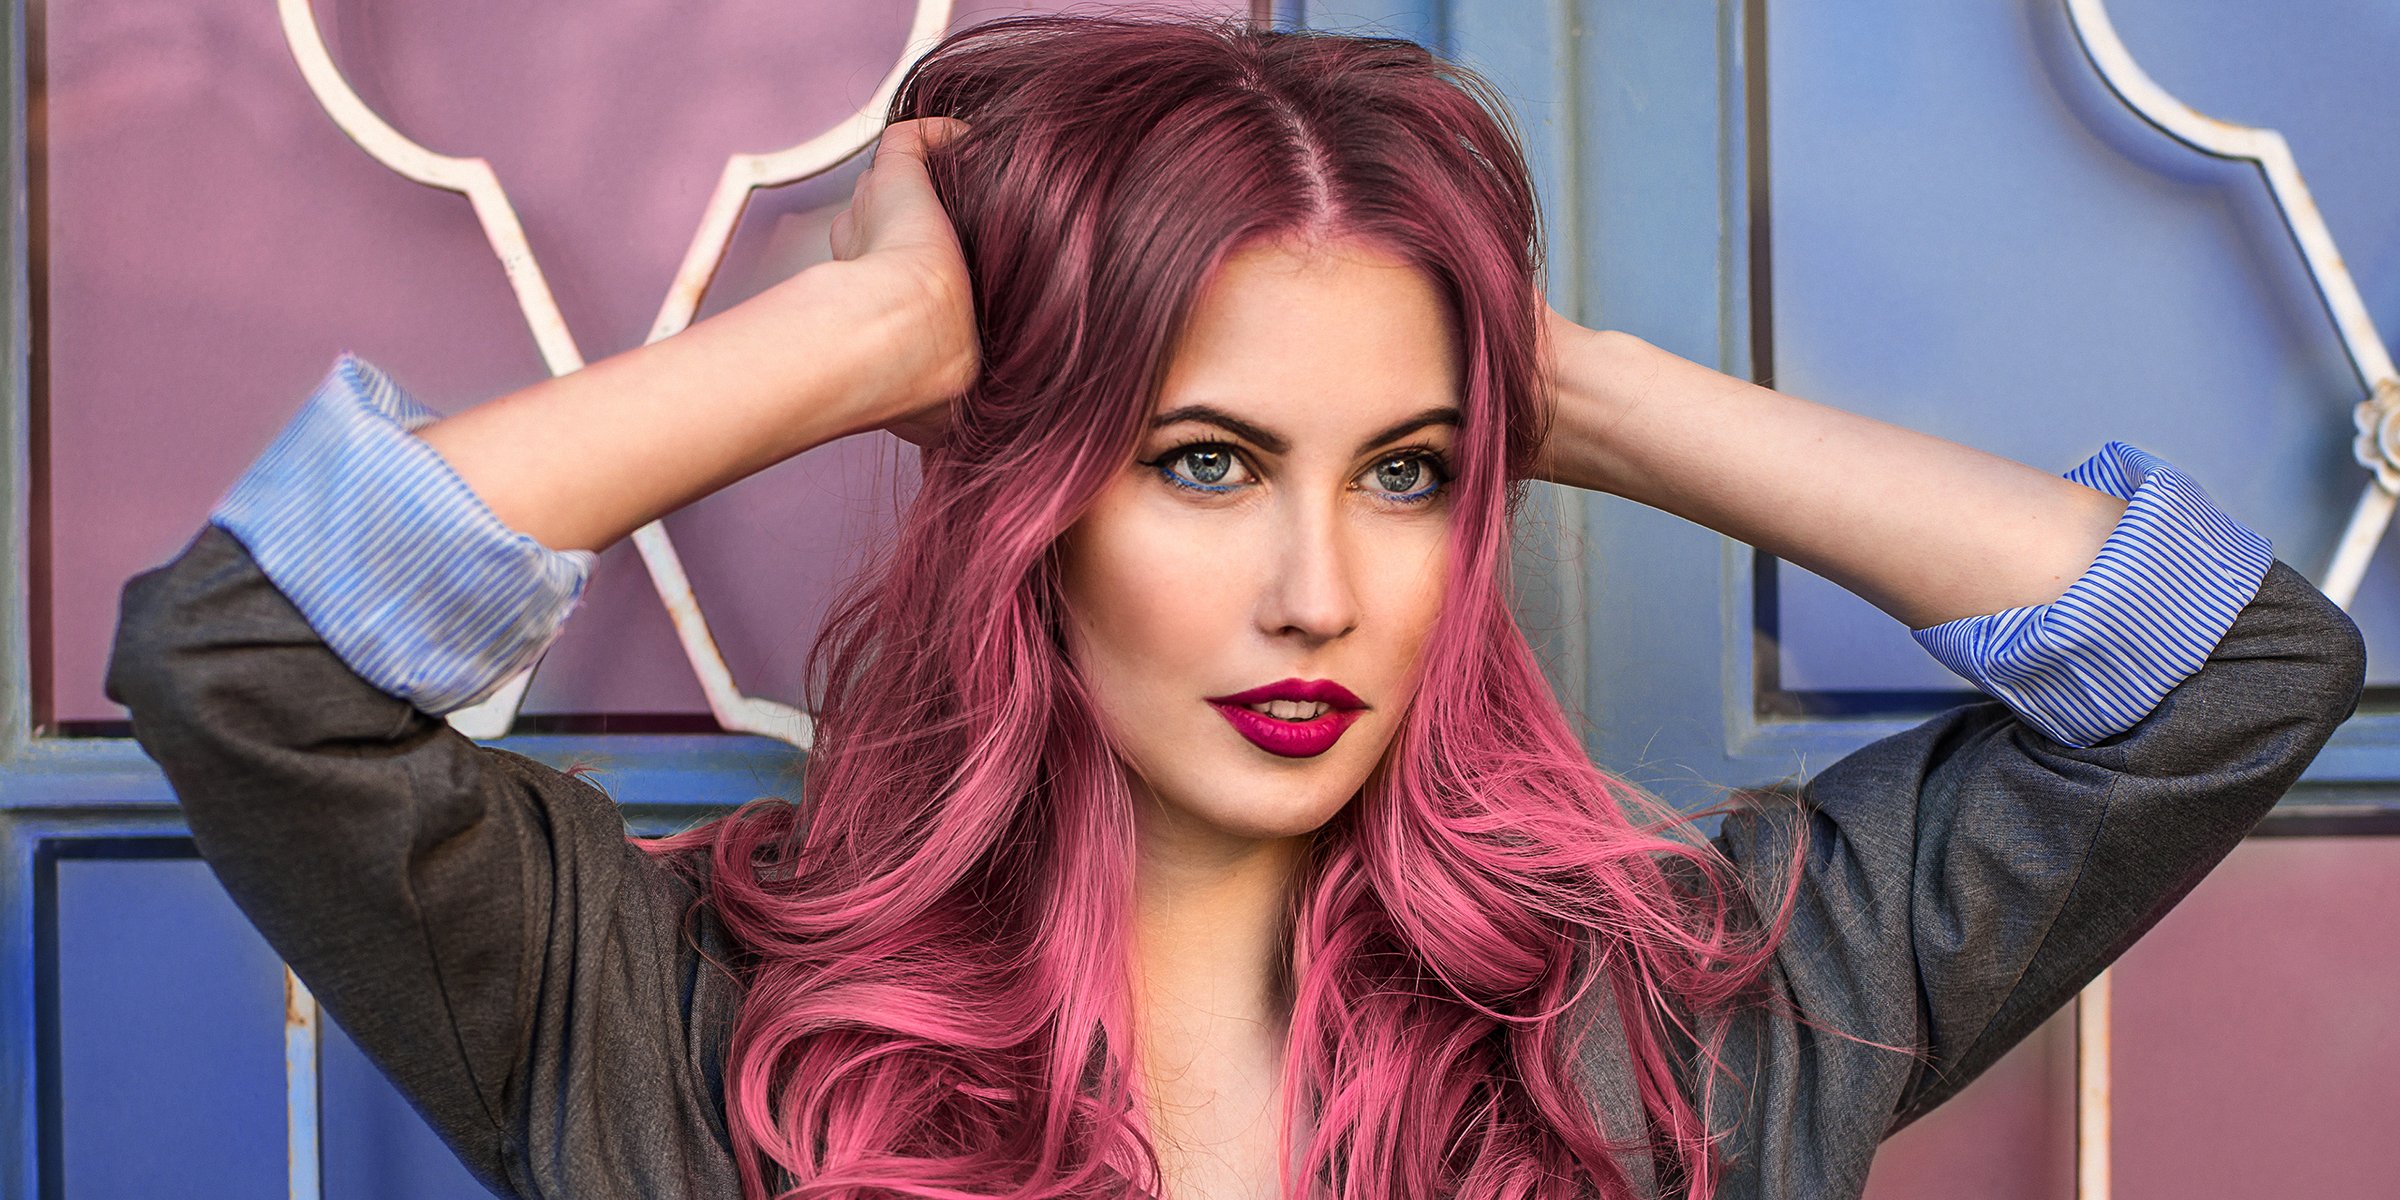 A model with a darker shade of dusty rose hair. l Source: Shutterstock.com